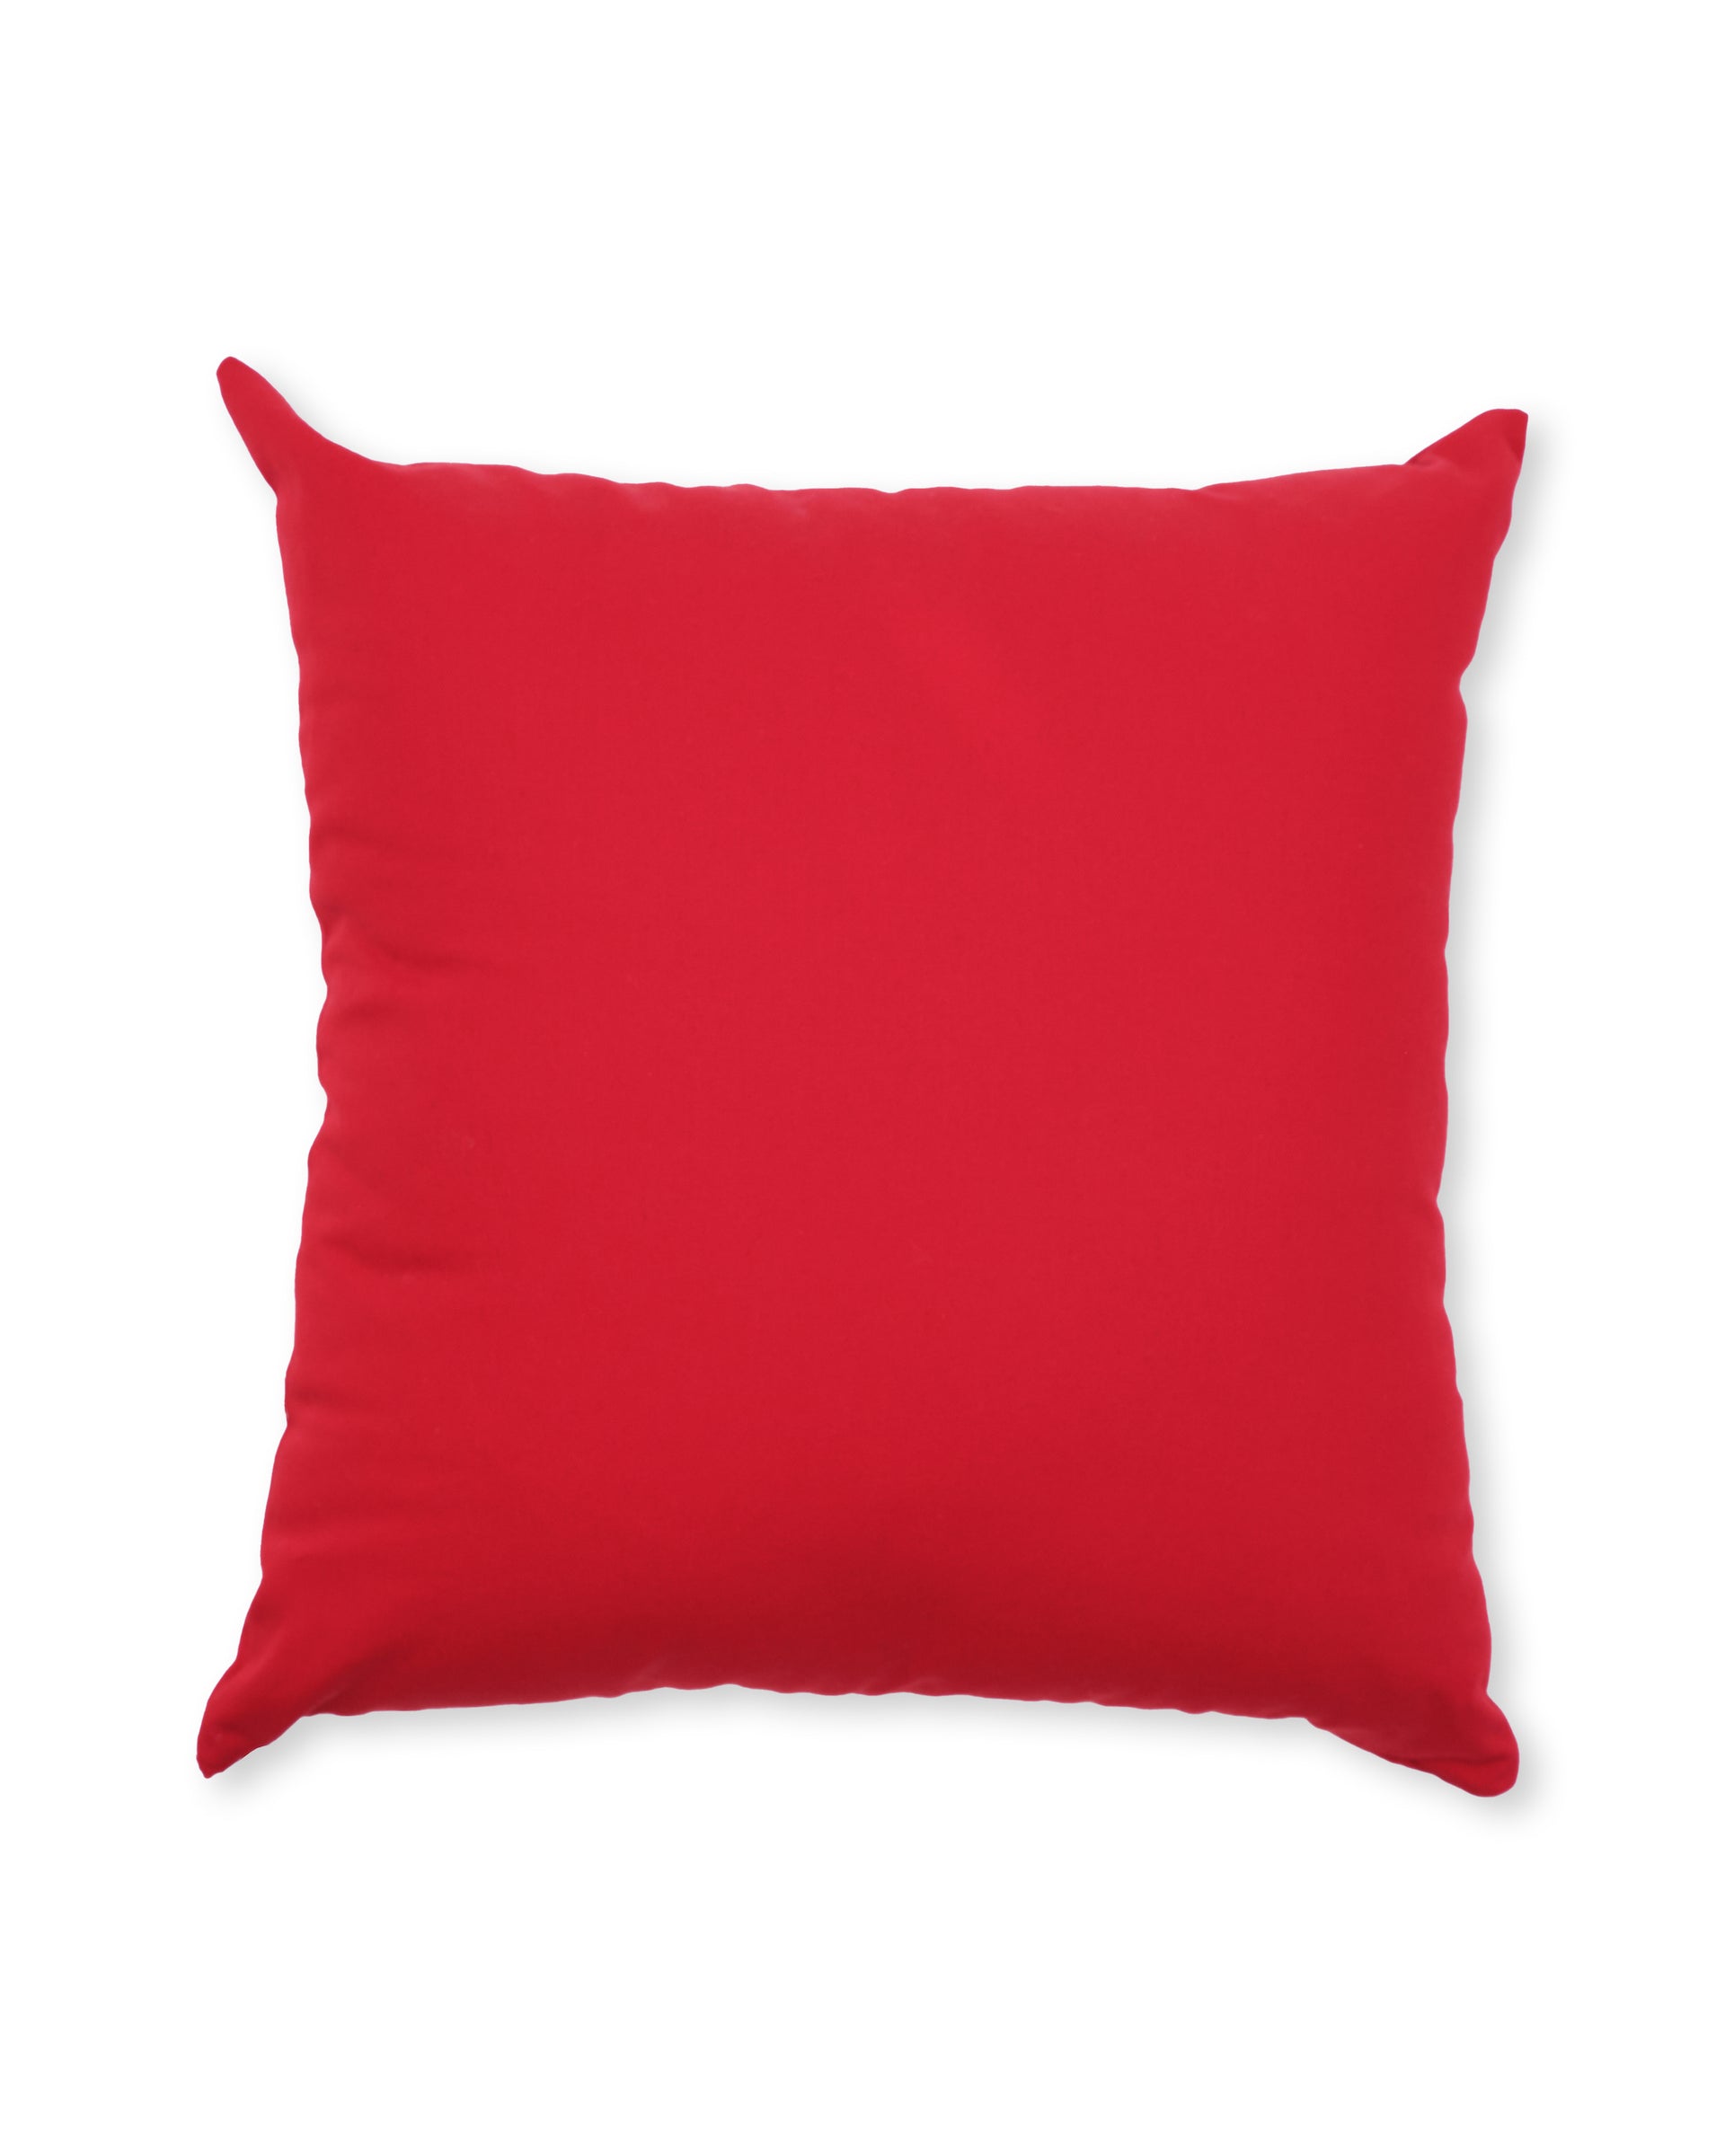 Brain Dead x Ray Johnson Embroidered Couch Cushion - Red 2